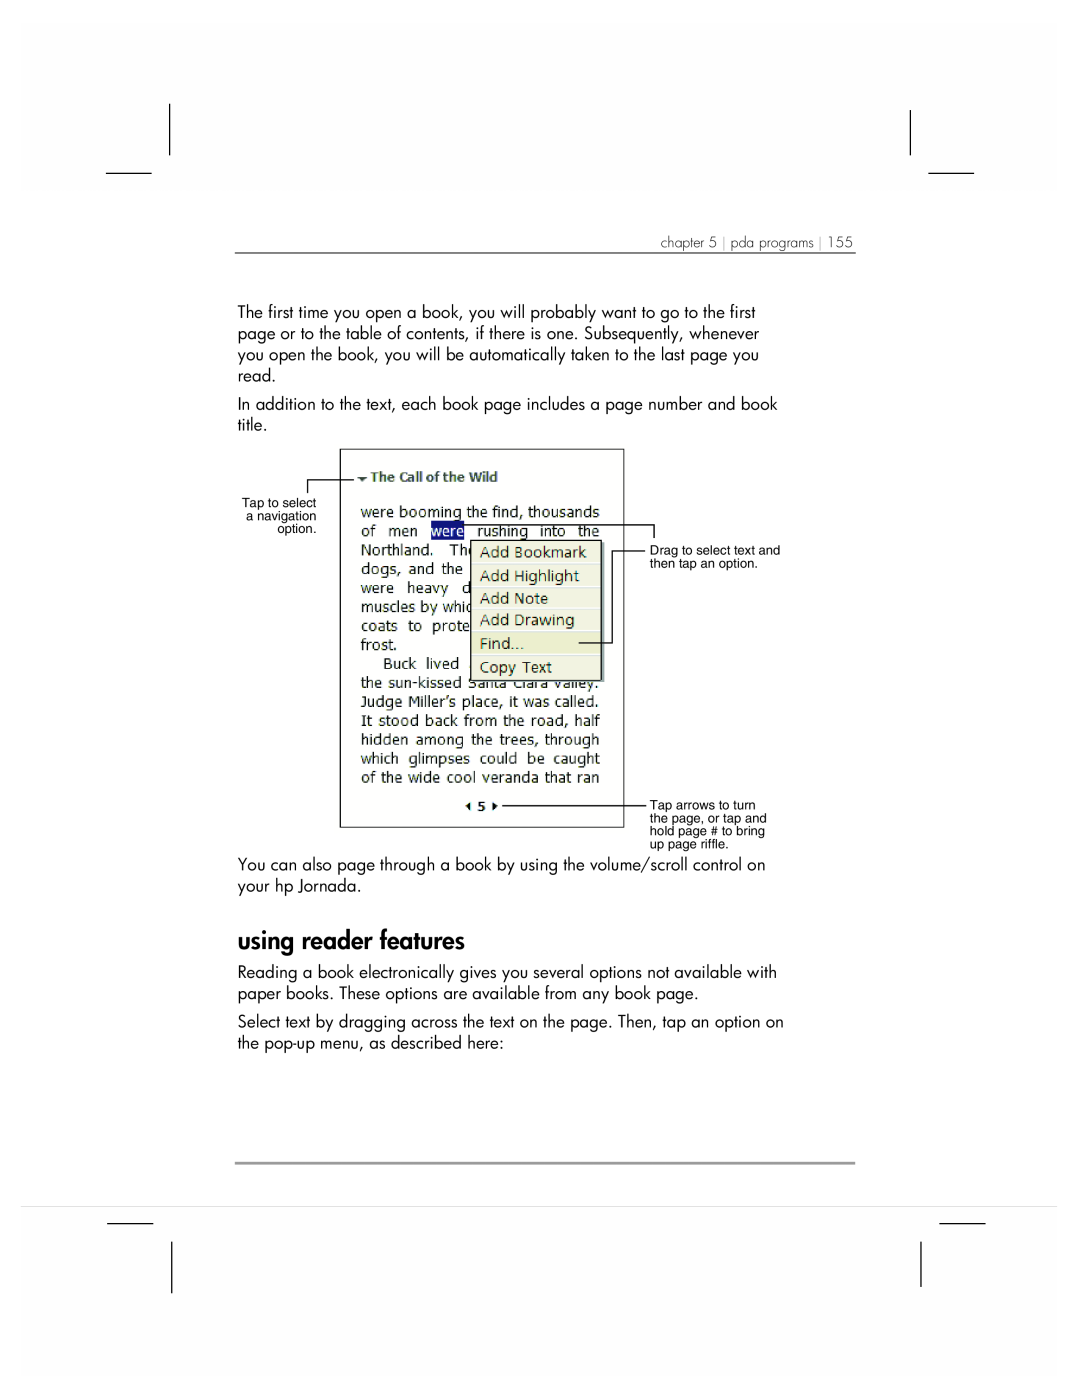 HP 920 manual using reader features, Tap to select a navigation option 